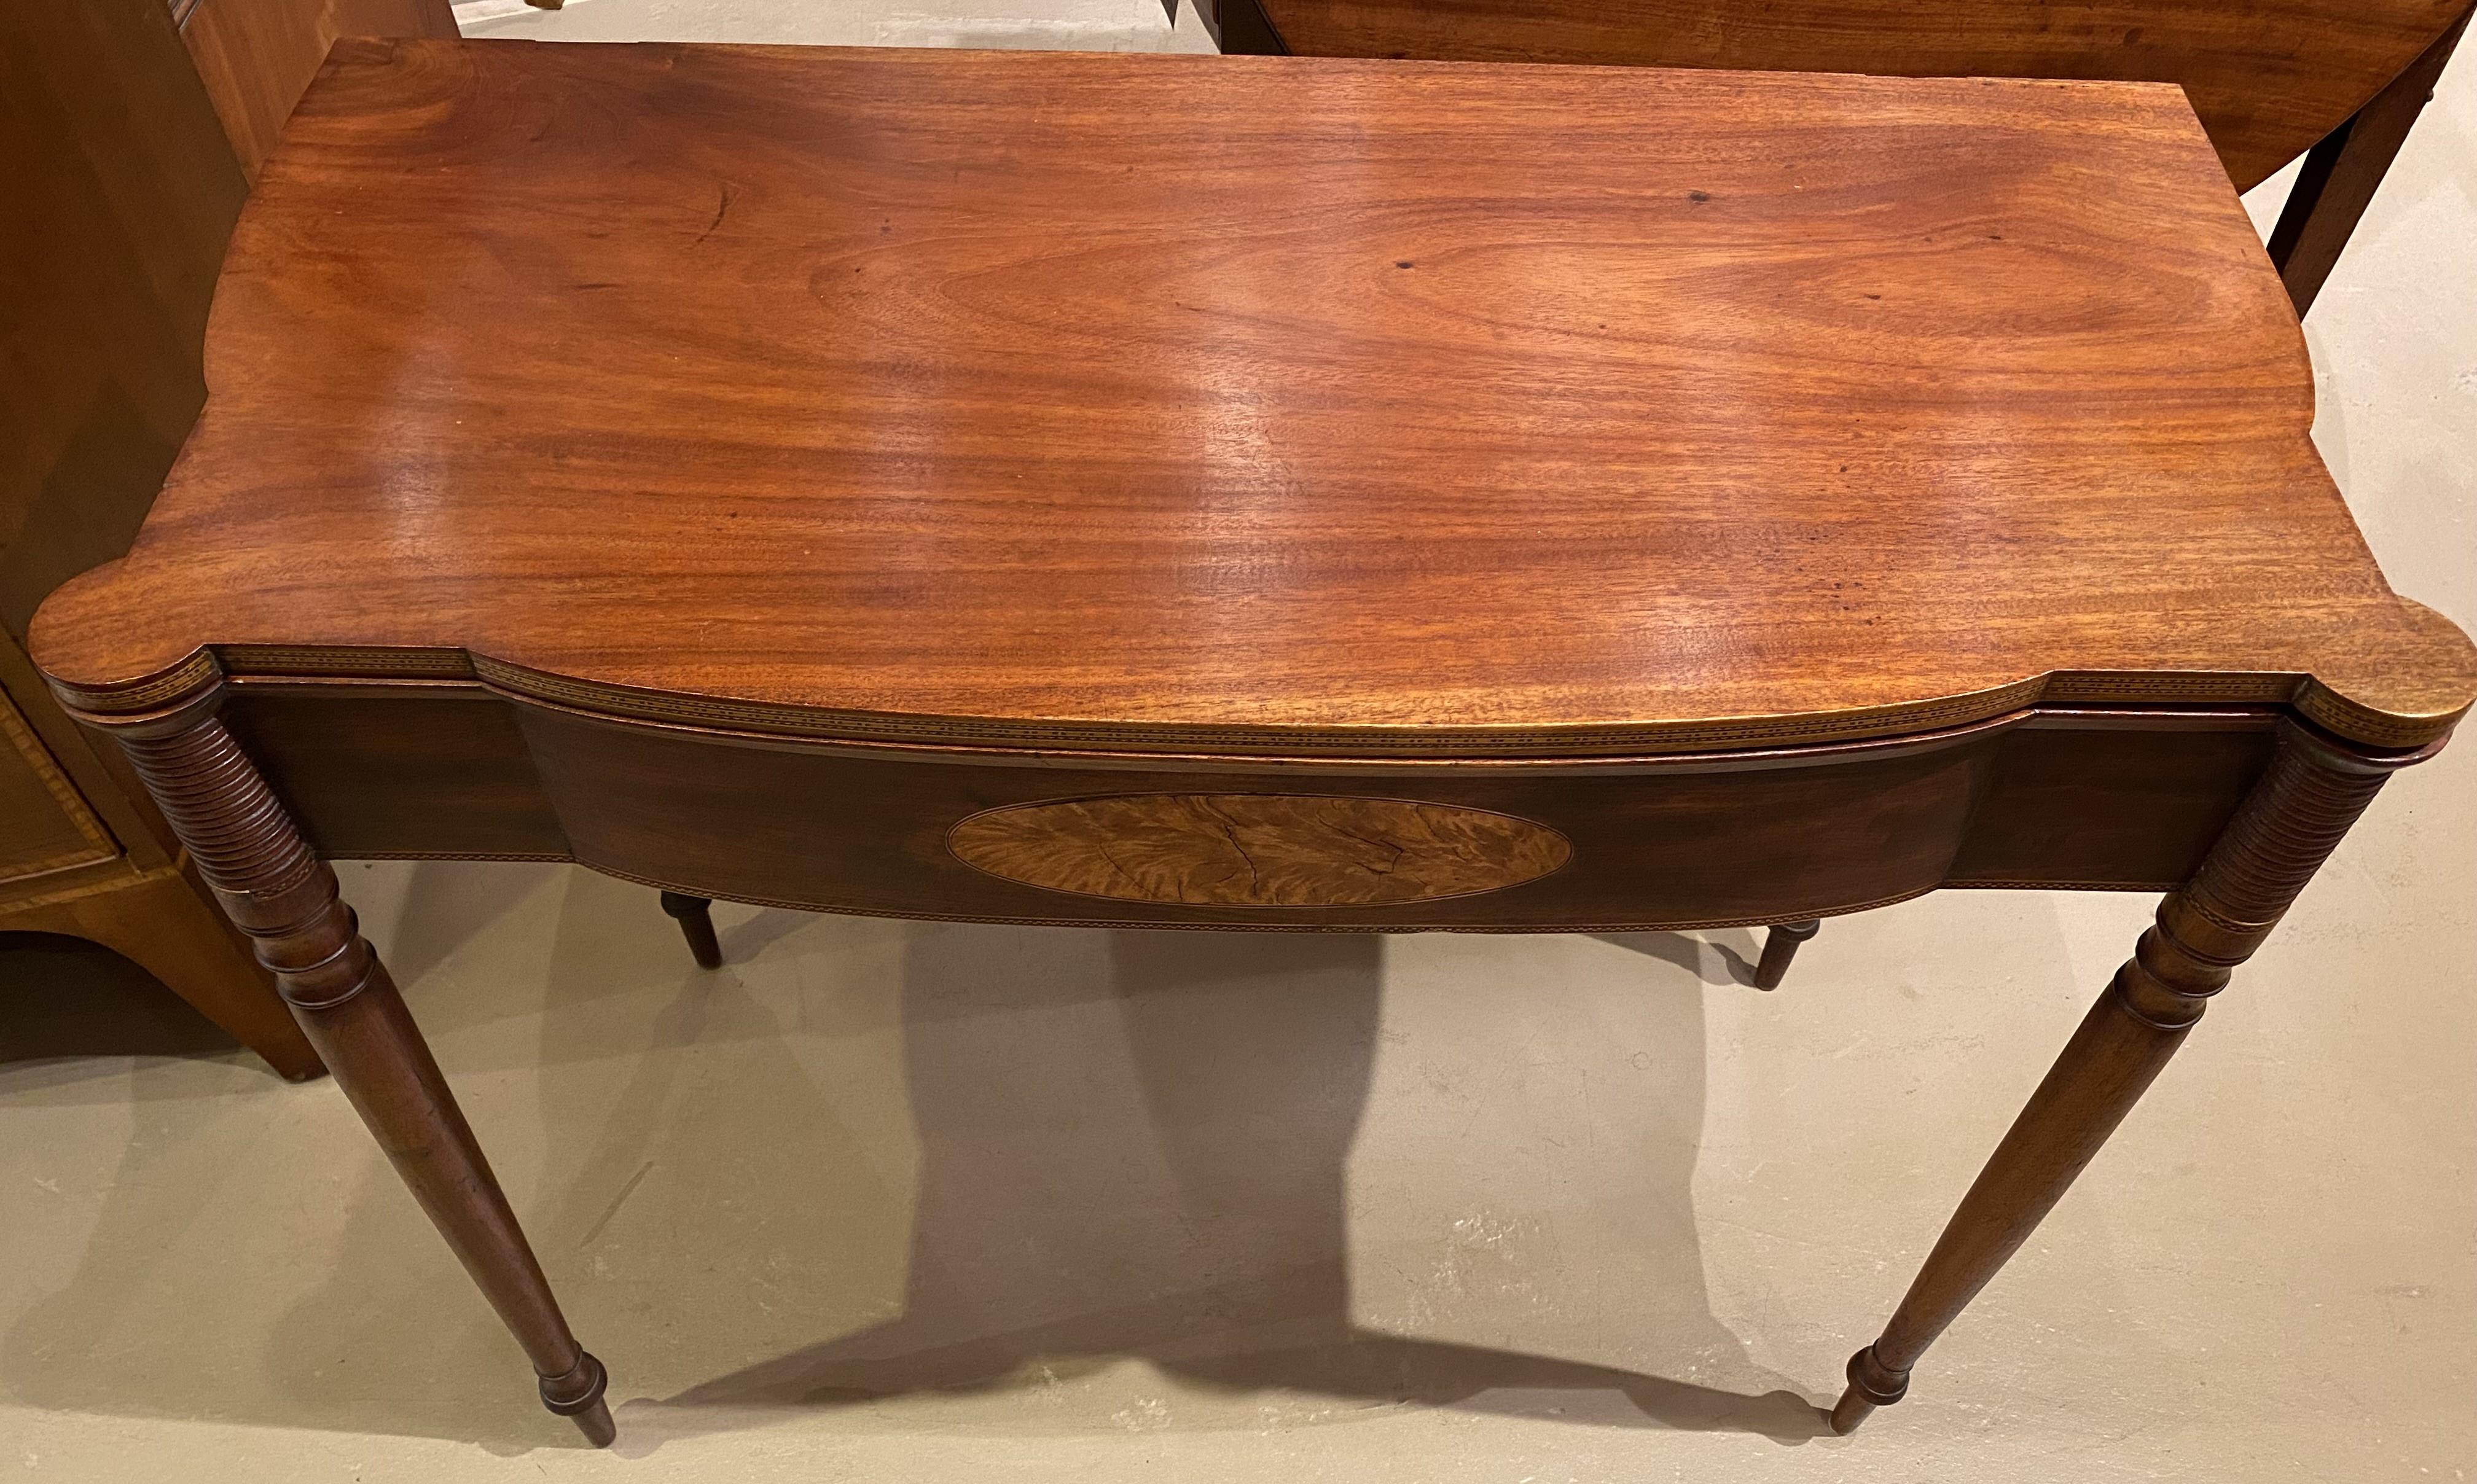 A fine example of a Federal Period, Sheraton mahogany card or gaming table with turret corners, checkered inlay around the folding top edge, a shaped frieze with an oval patera, all supported by nicely turned round tapered legs. Dates to circa